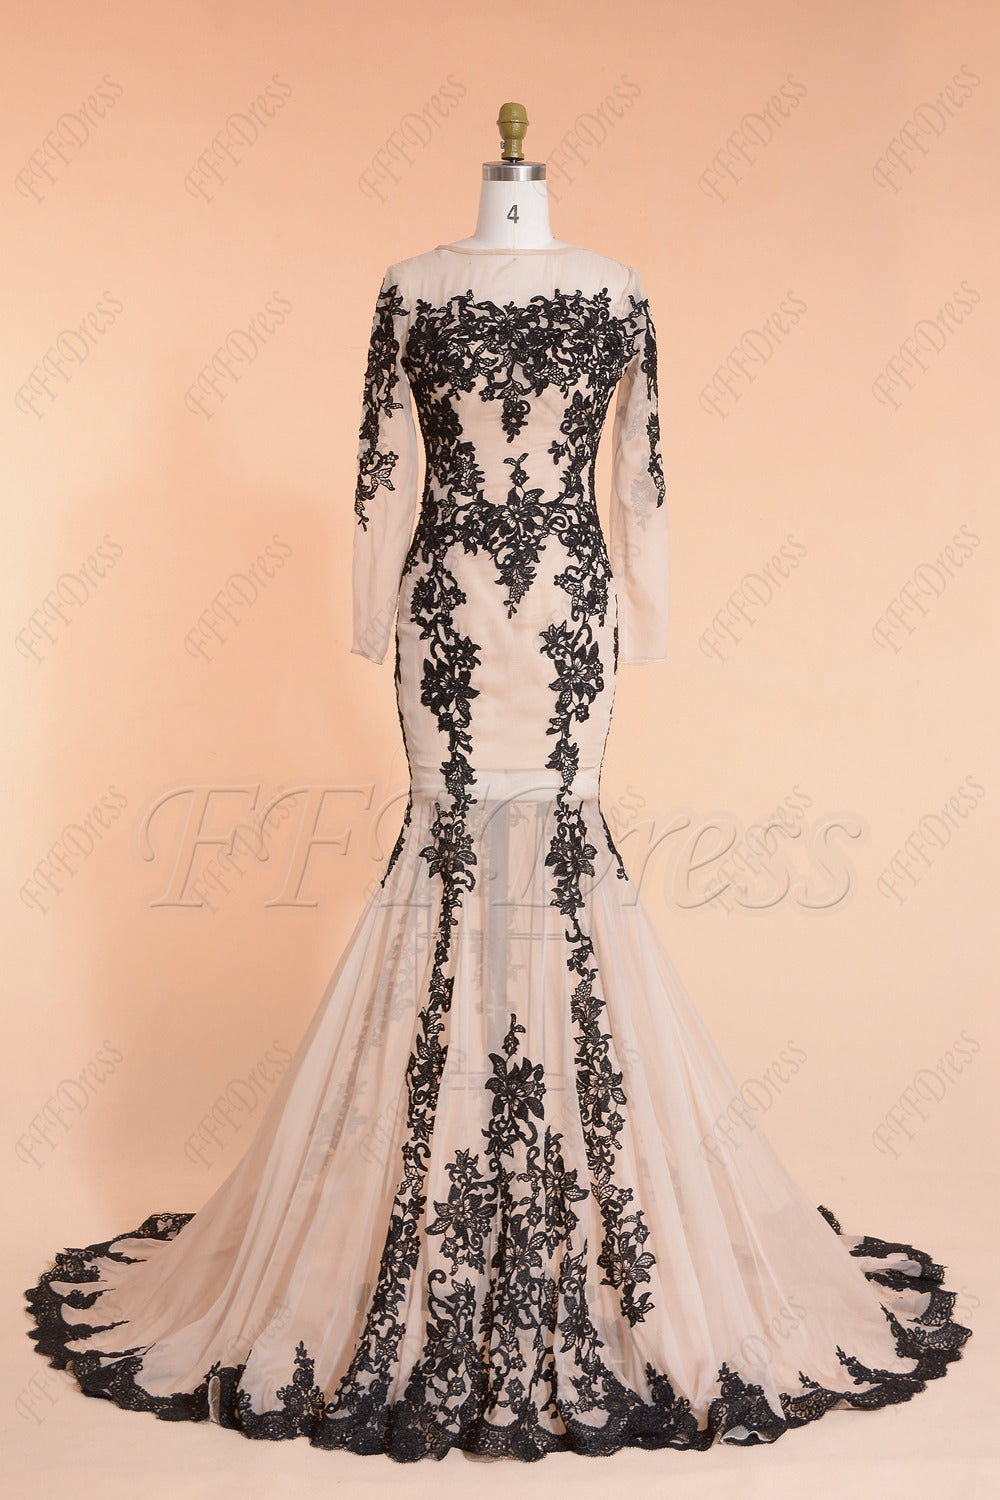 Champagne mermaid prom dresses long sleeves black embroidery